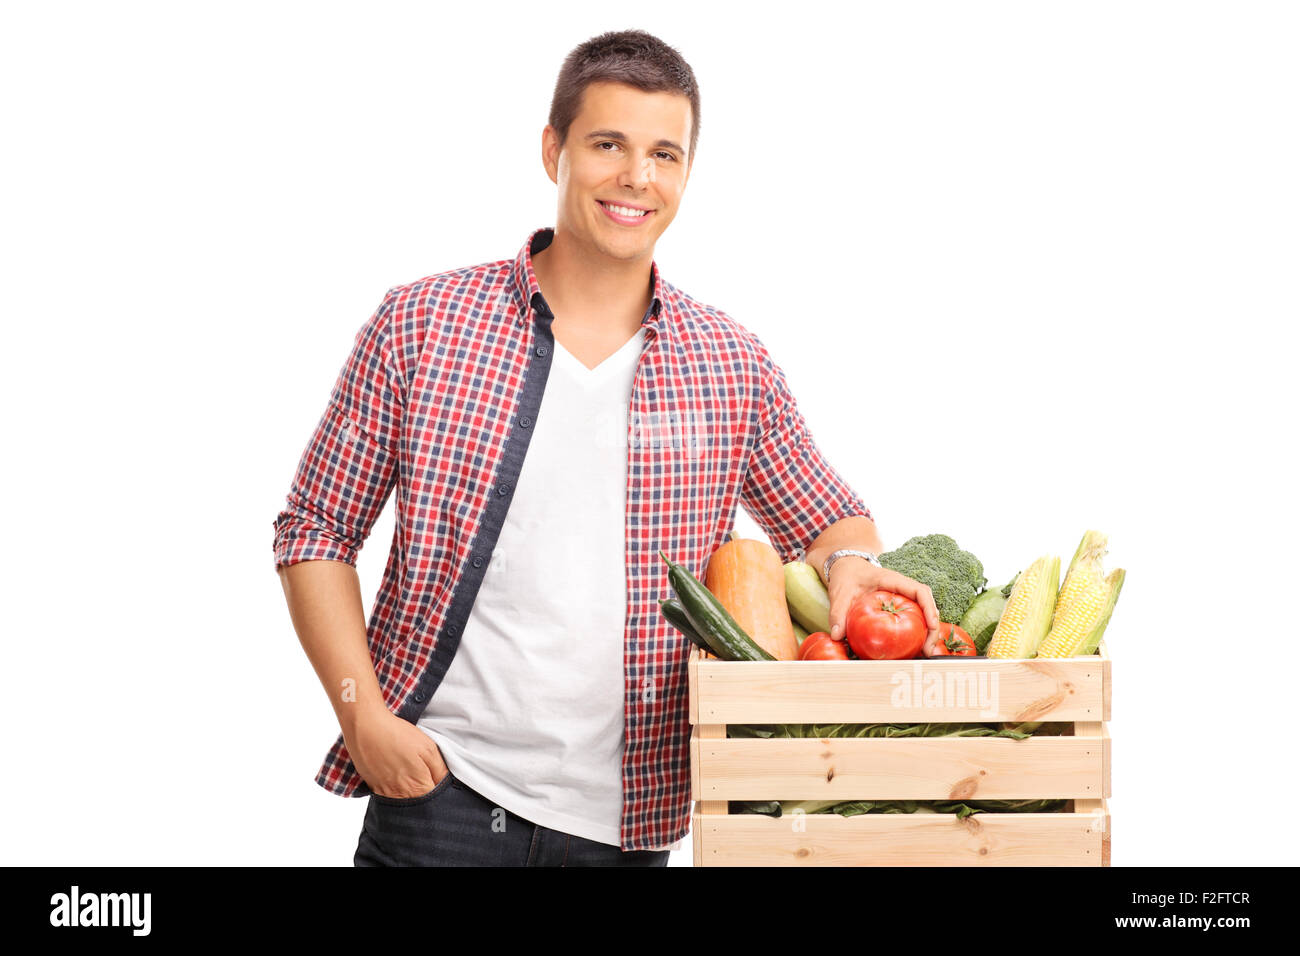 Young man leaning on a crate full of fresh vegetables and looking at the camera isolated on white background Stock Photo